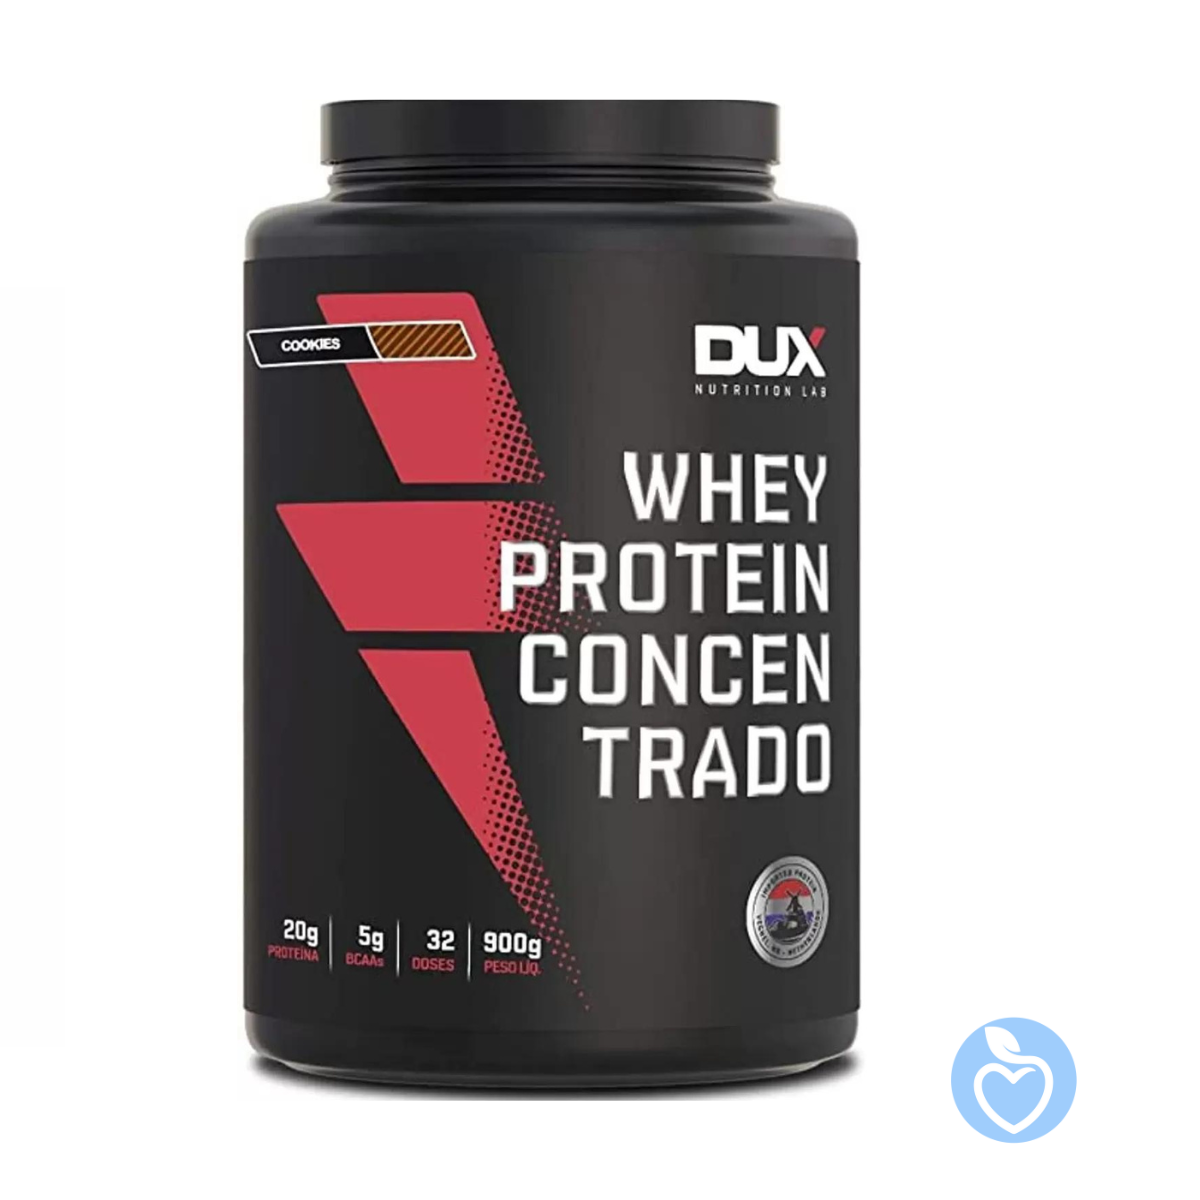 Whey Protein Concentrado - Cookies - 900 g - Dux